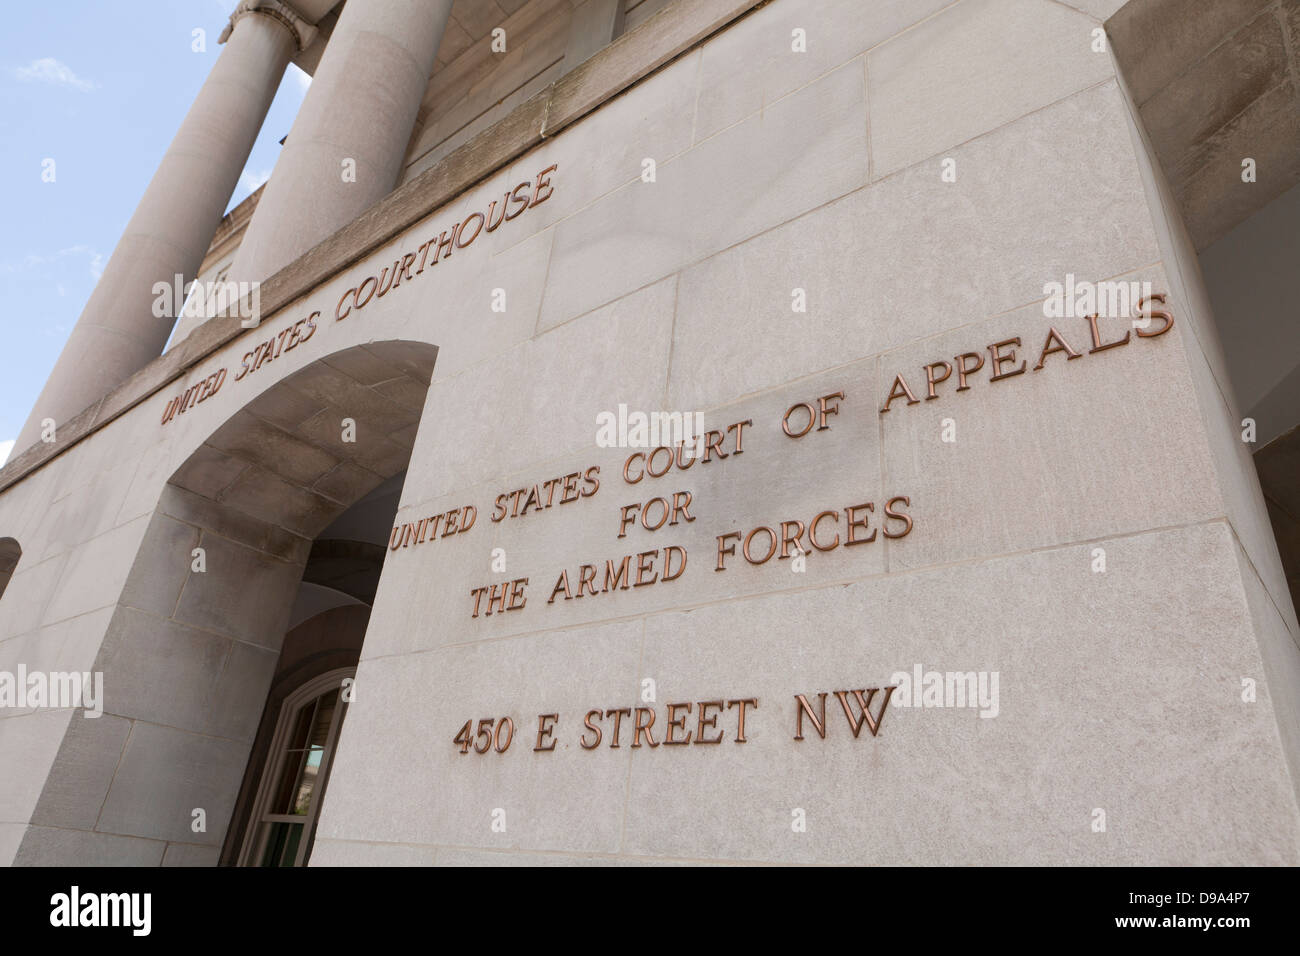 US Court of Appeals for The Armed Forces building - Washington, DC USA Stock Photo